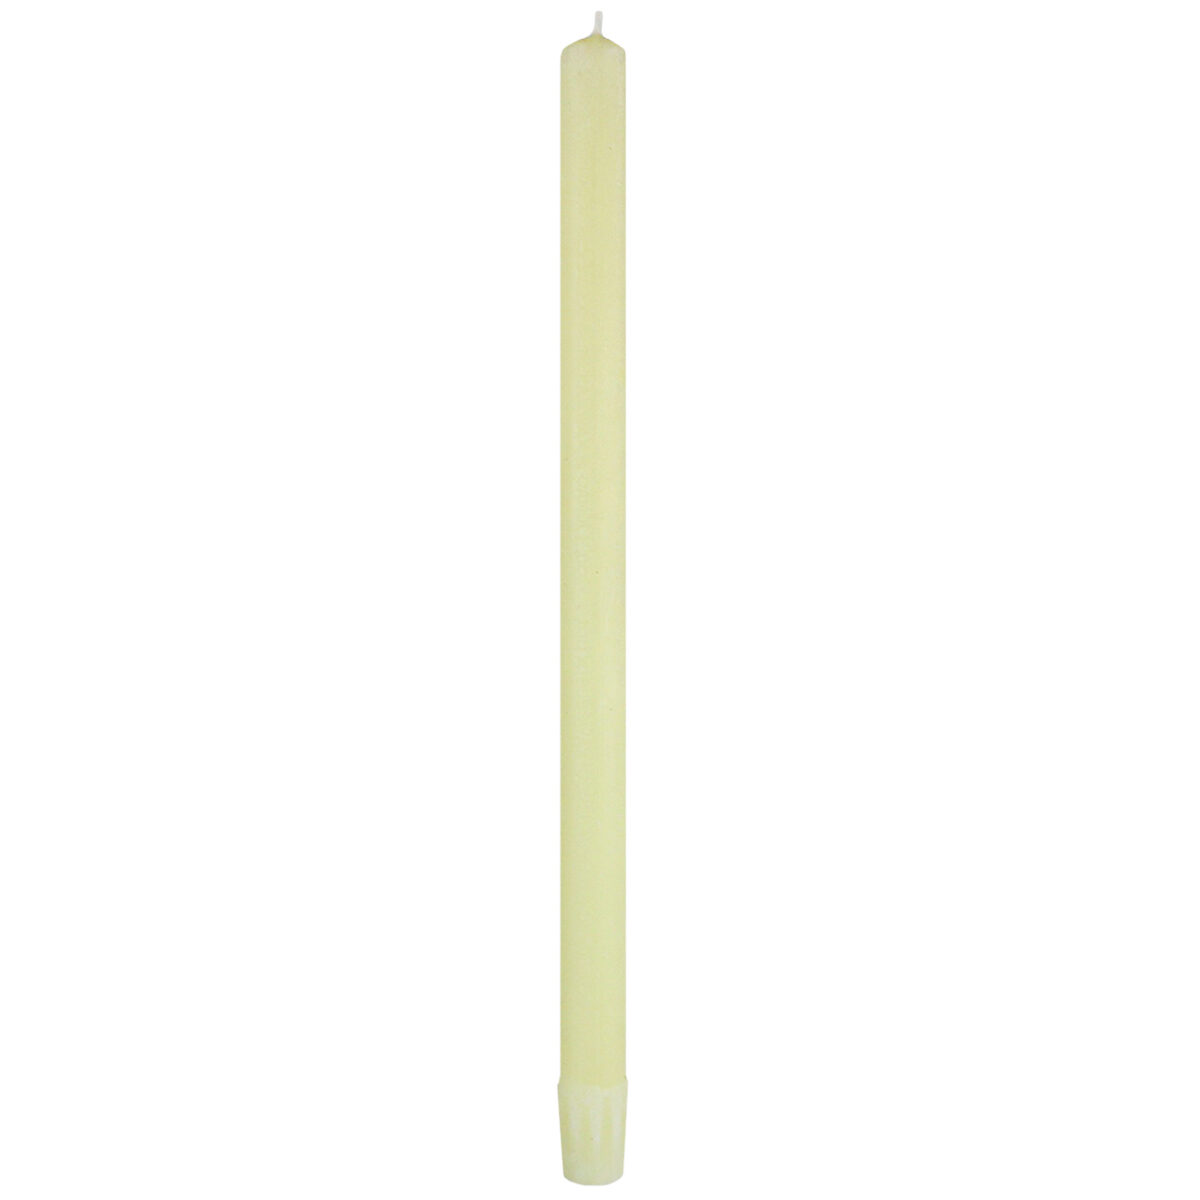 100% Beeswax 1" x 19" Self fitting End Candle Stick